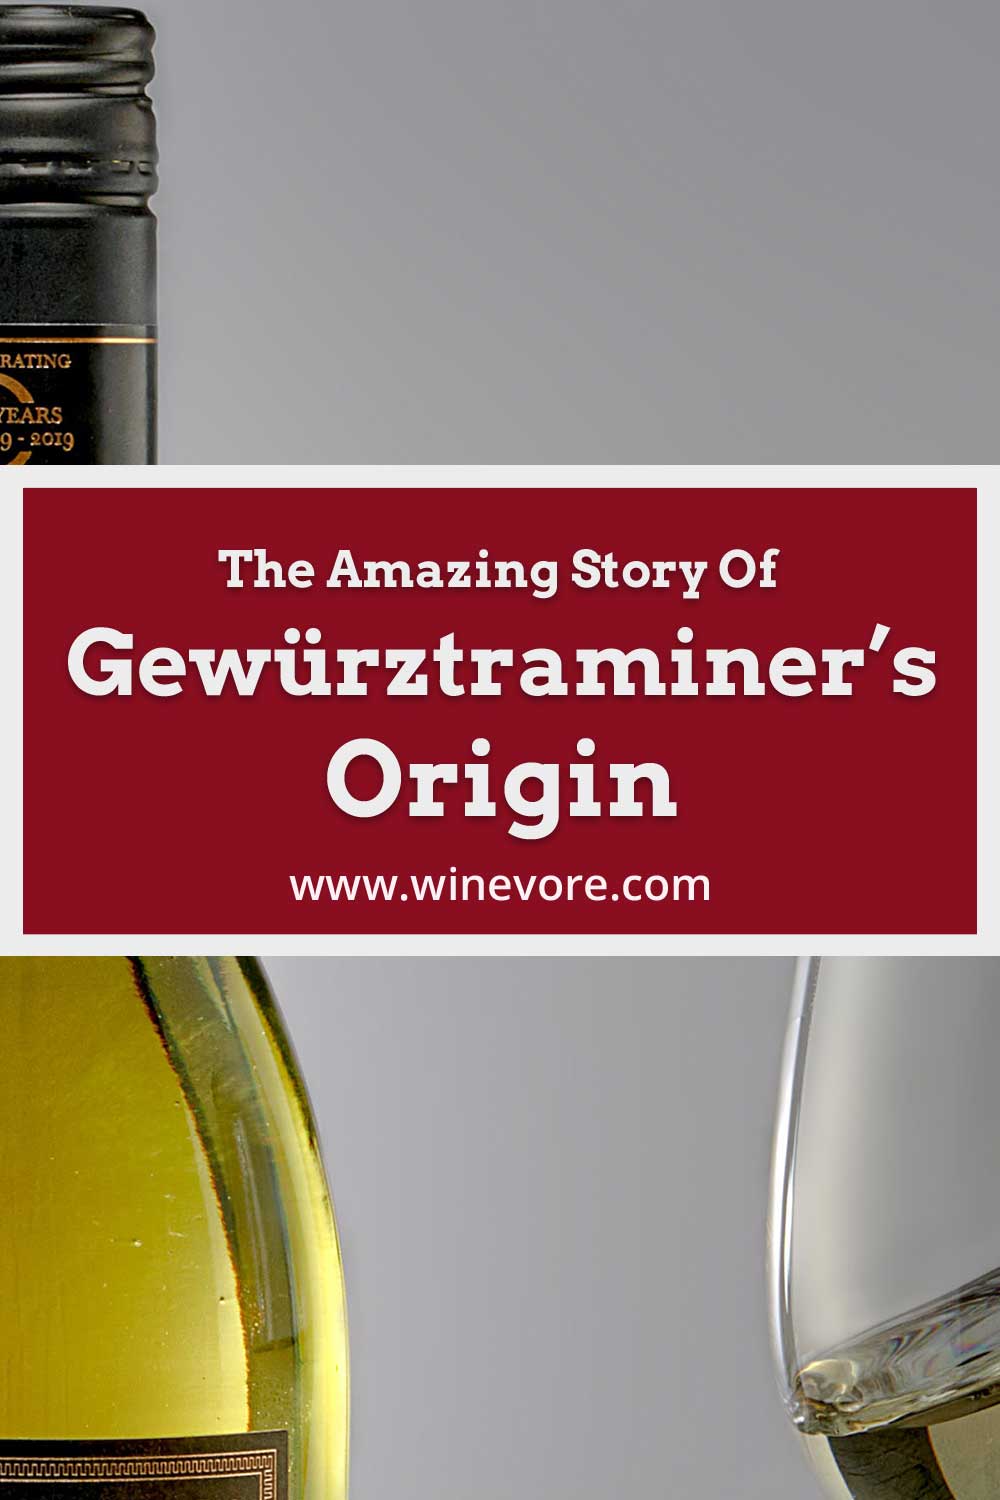 A sealed bottle of wine with a glass - Story Of Gewürztraminer's Origin.